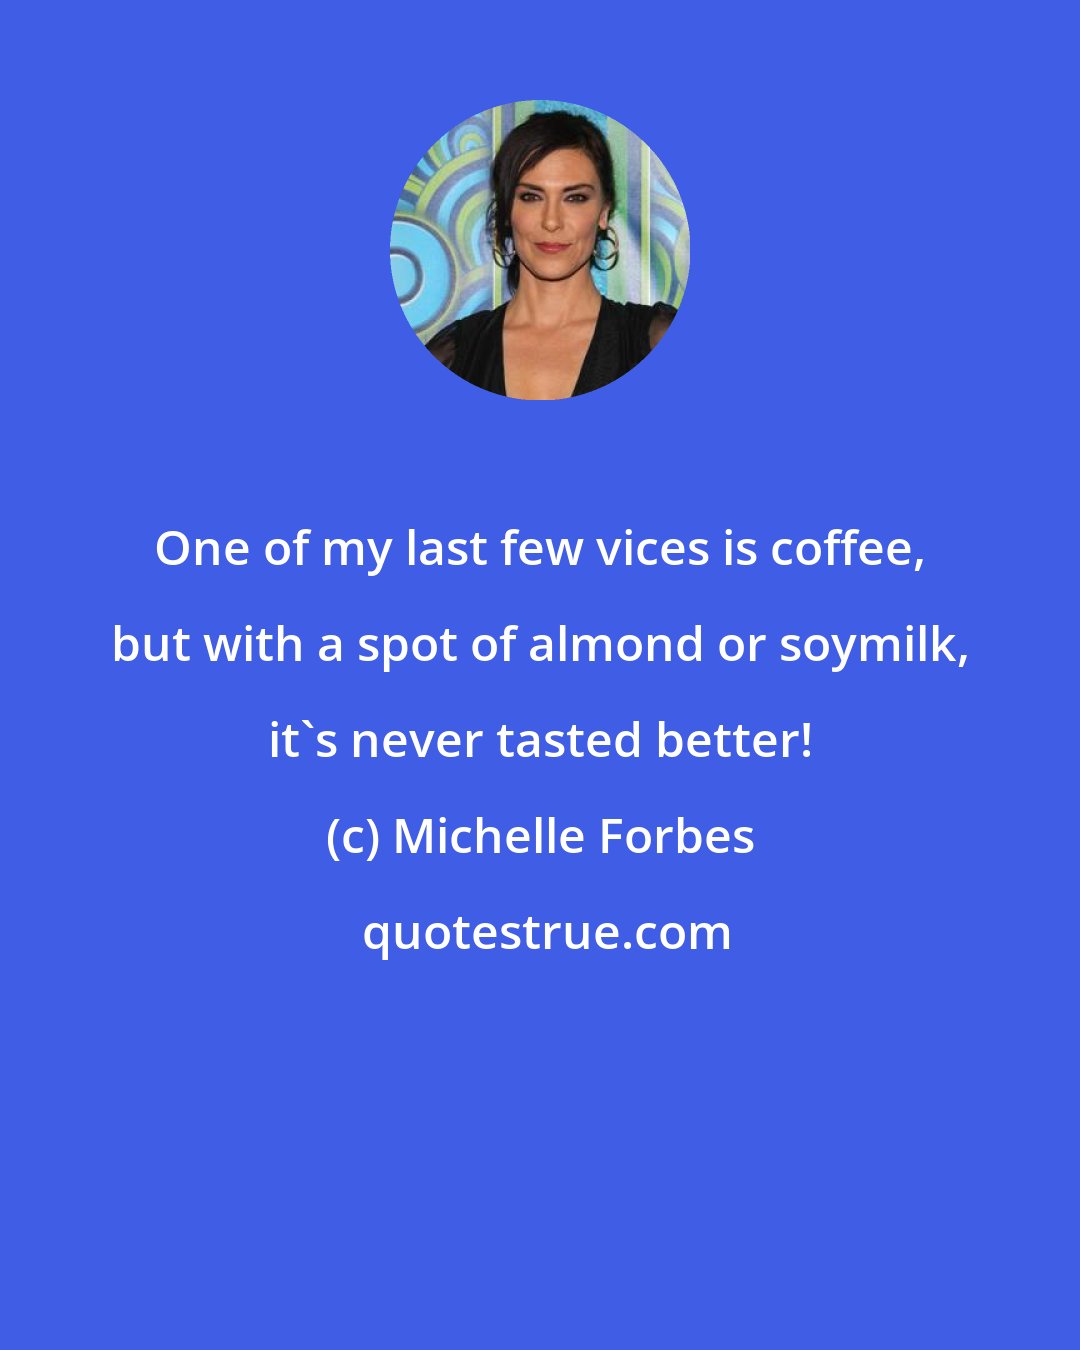 Michelle Forbes: One of my last few vices is coffee, but with a spot of almond or soymilk, it's never tasted better!